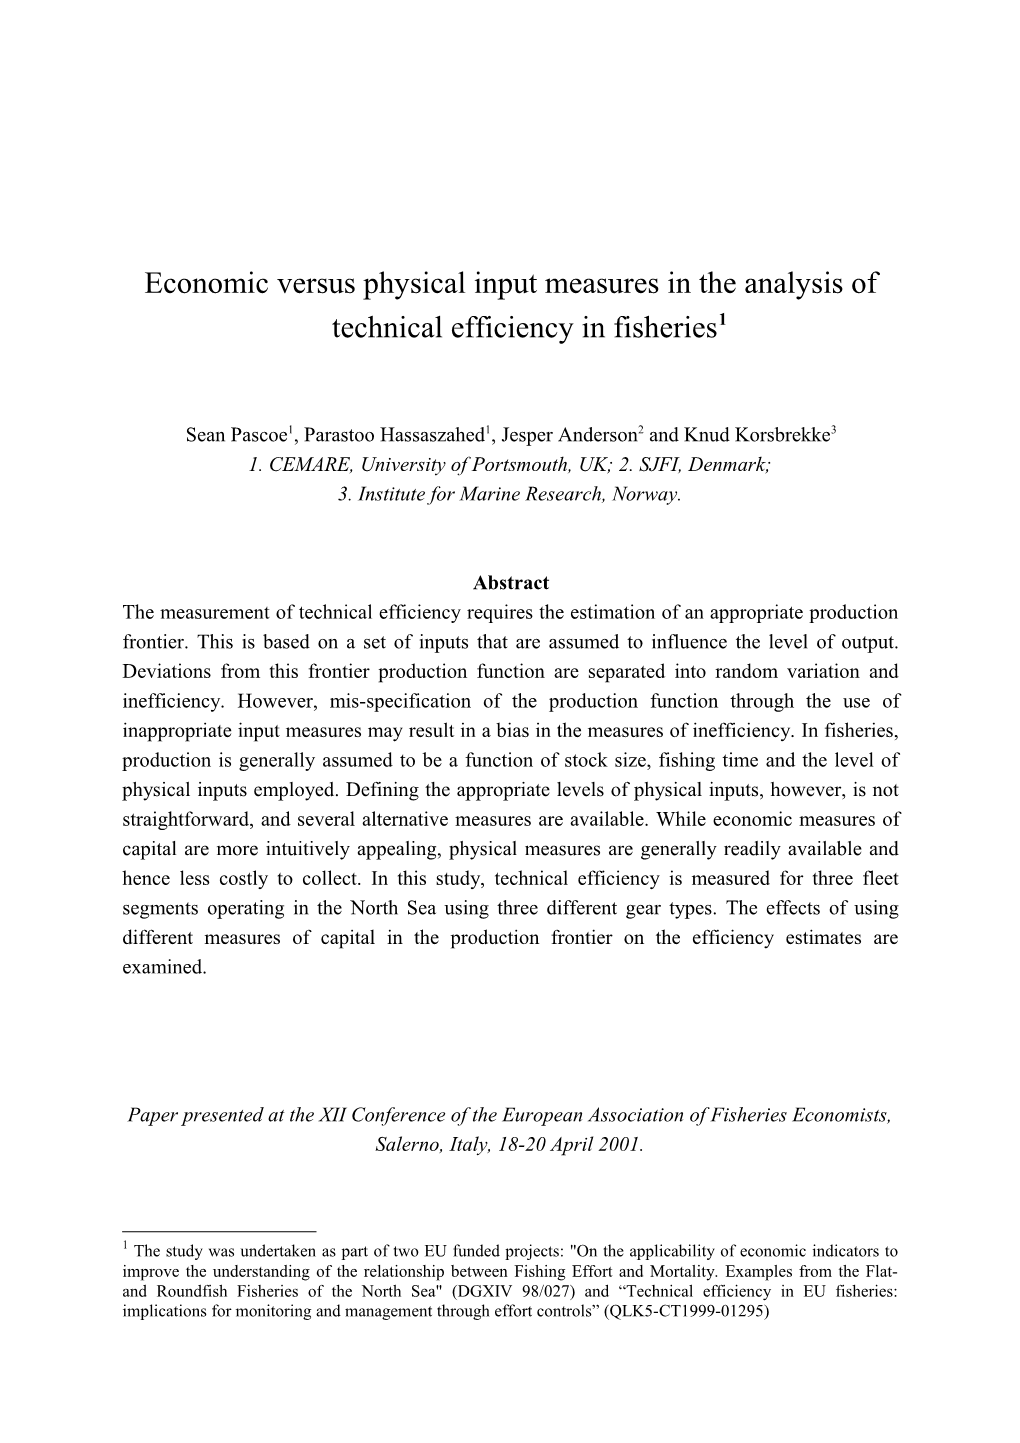 Economic Versus Physical Input Measures in the Analysis of Technical Efficiency in Fisheries